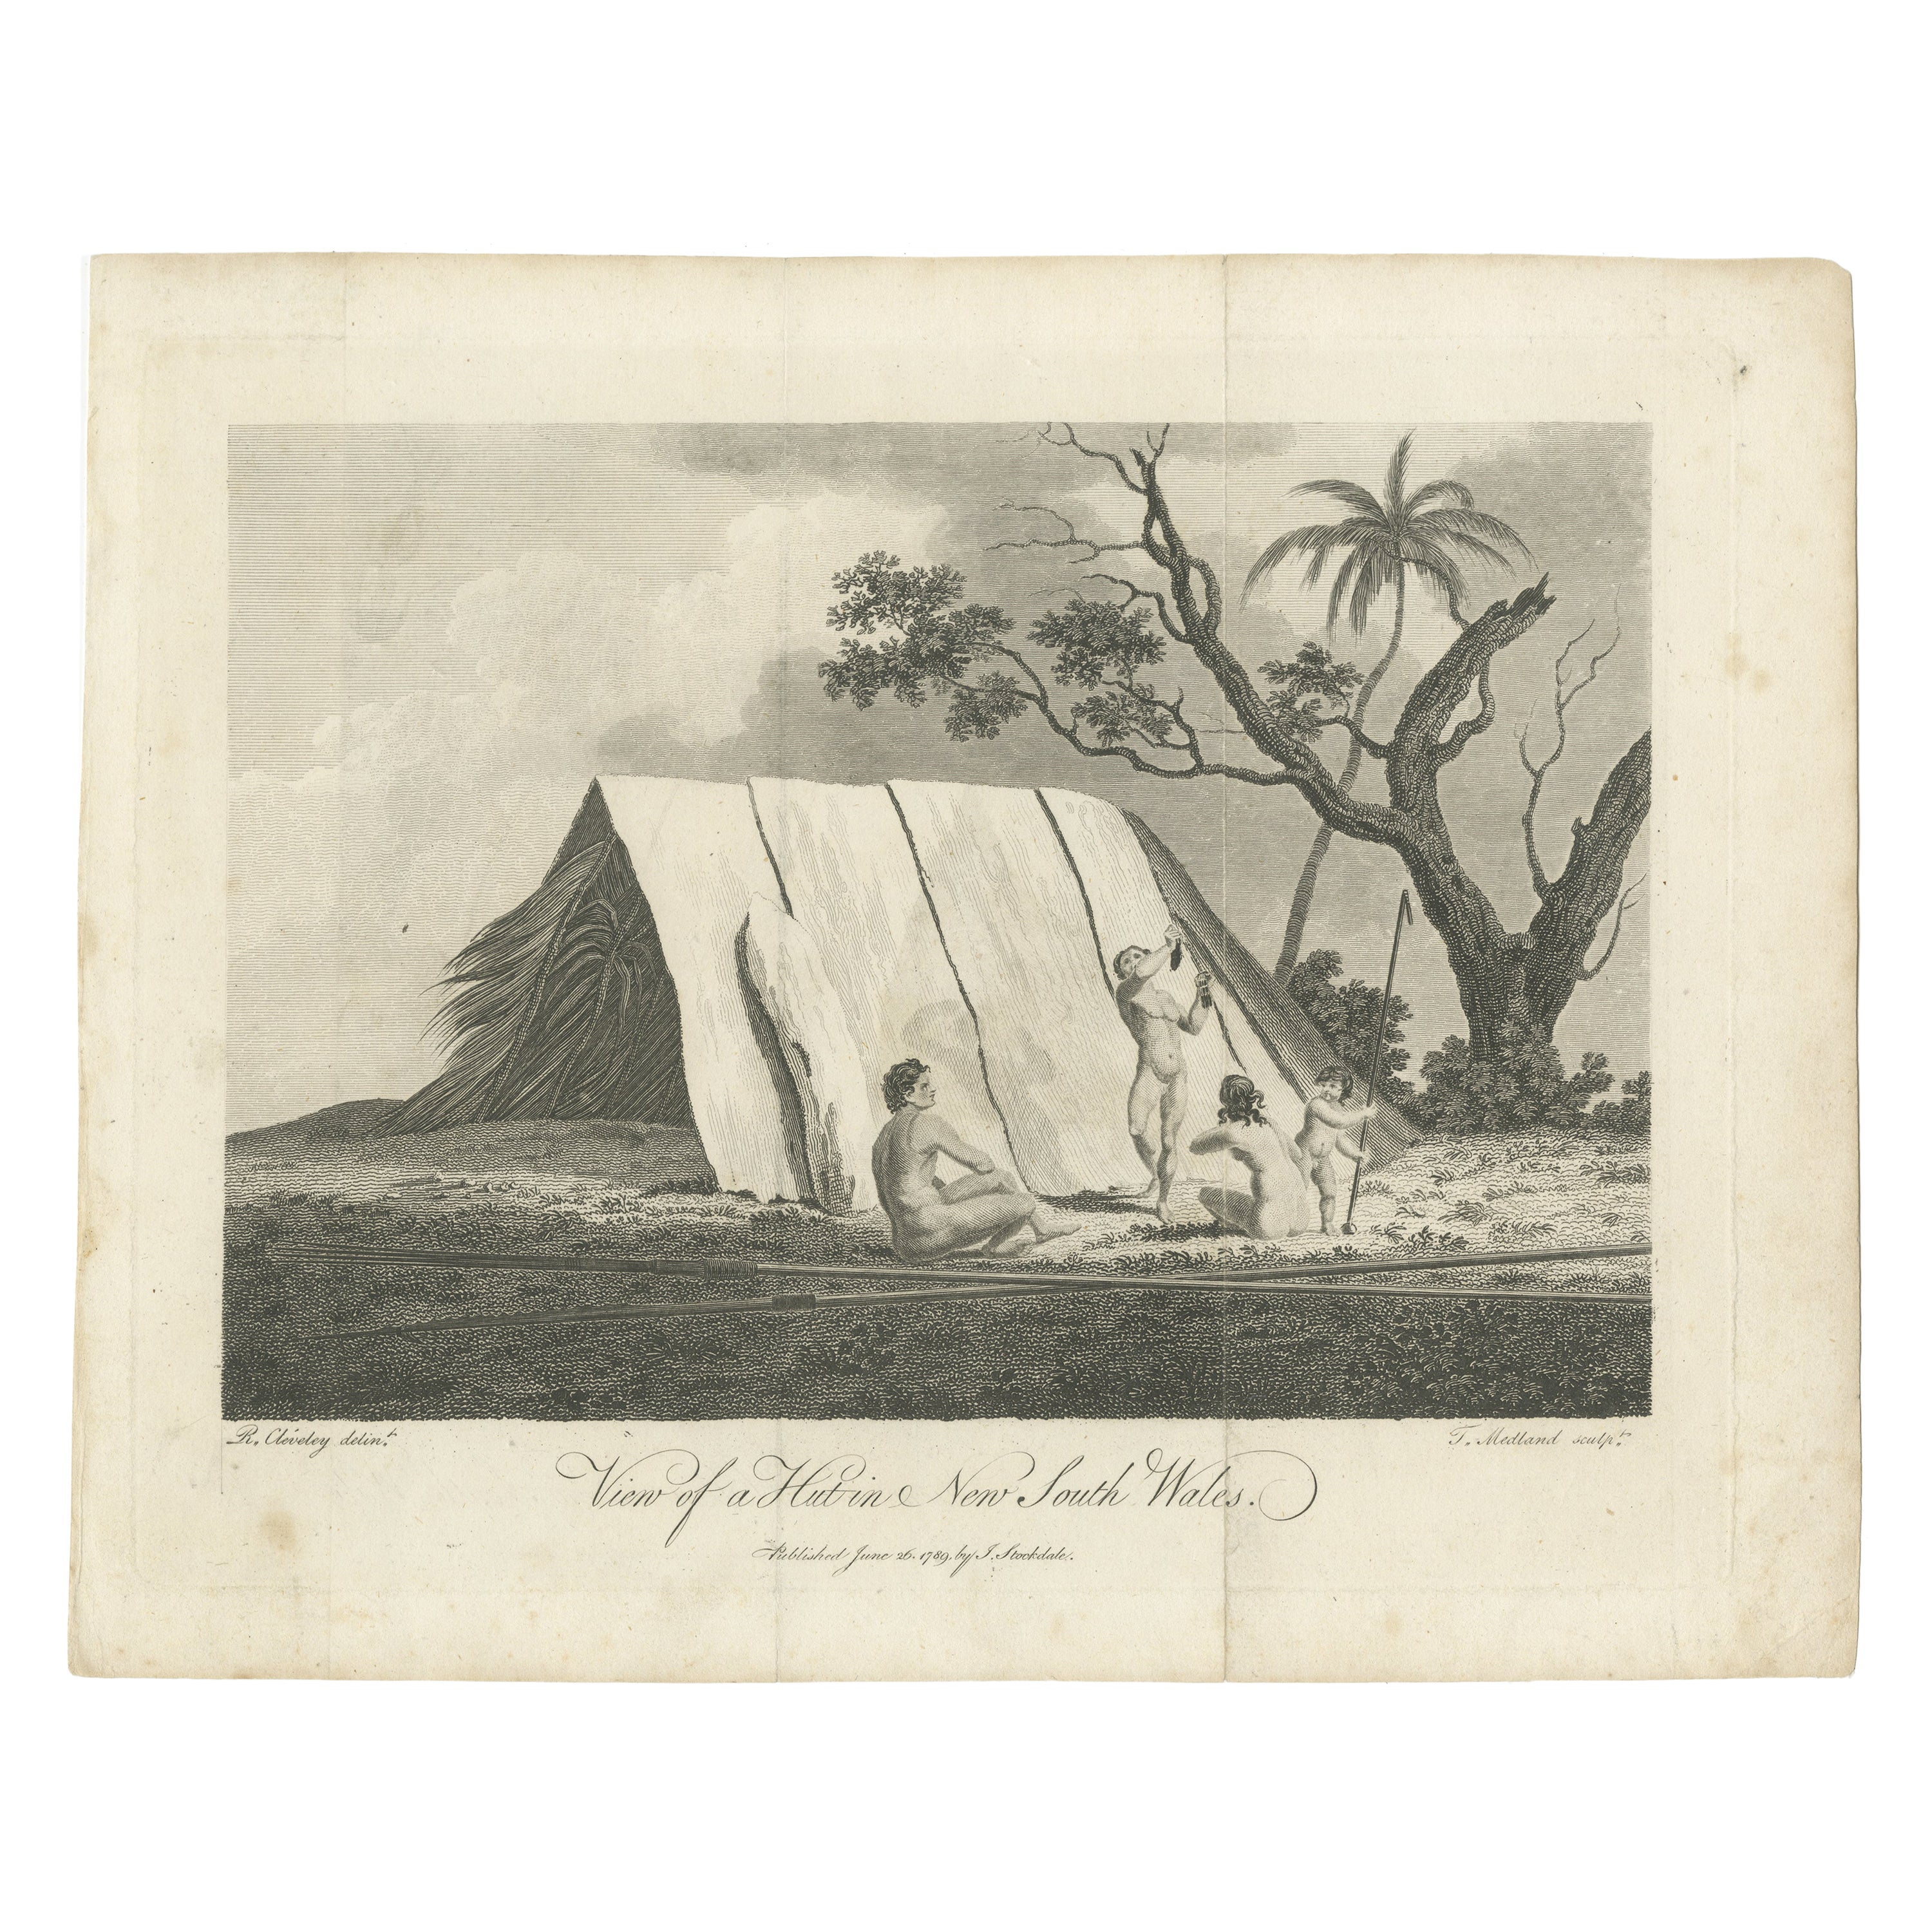 Scarce Print of Natives in New South Wales, Australia, c.1789